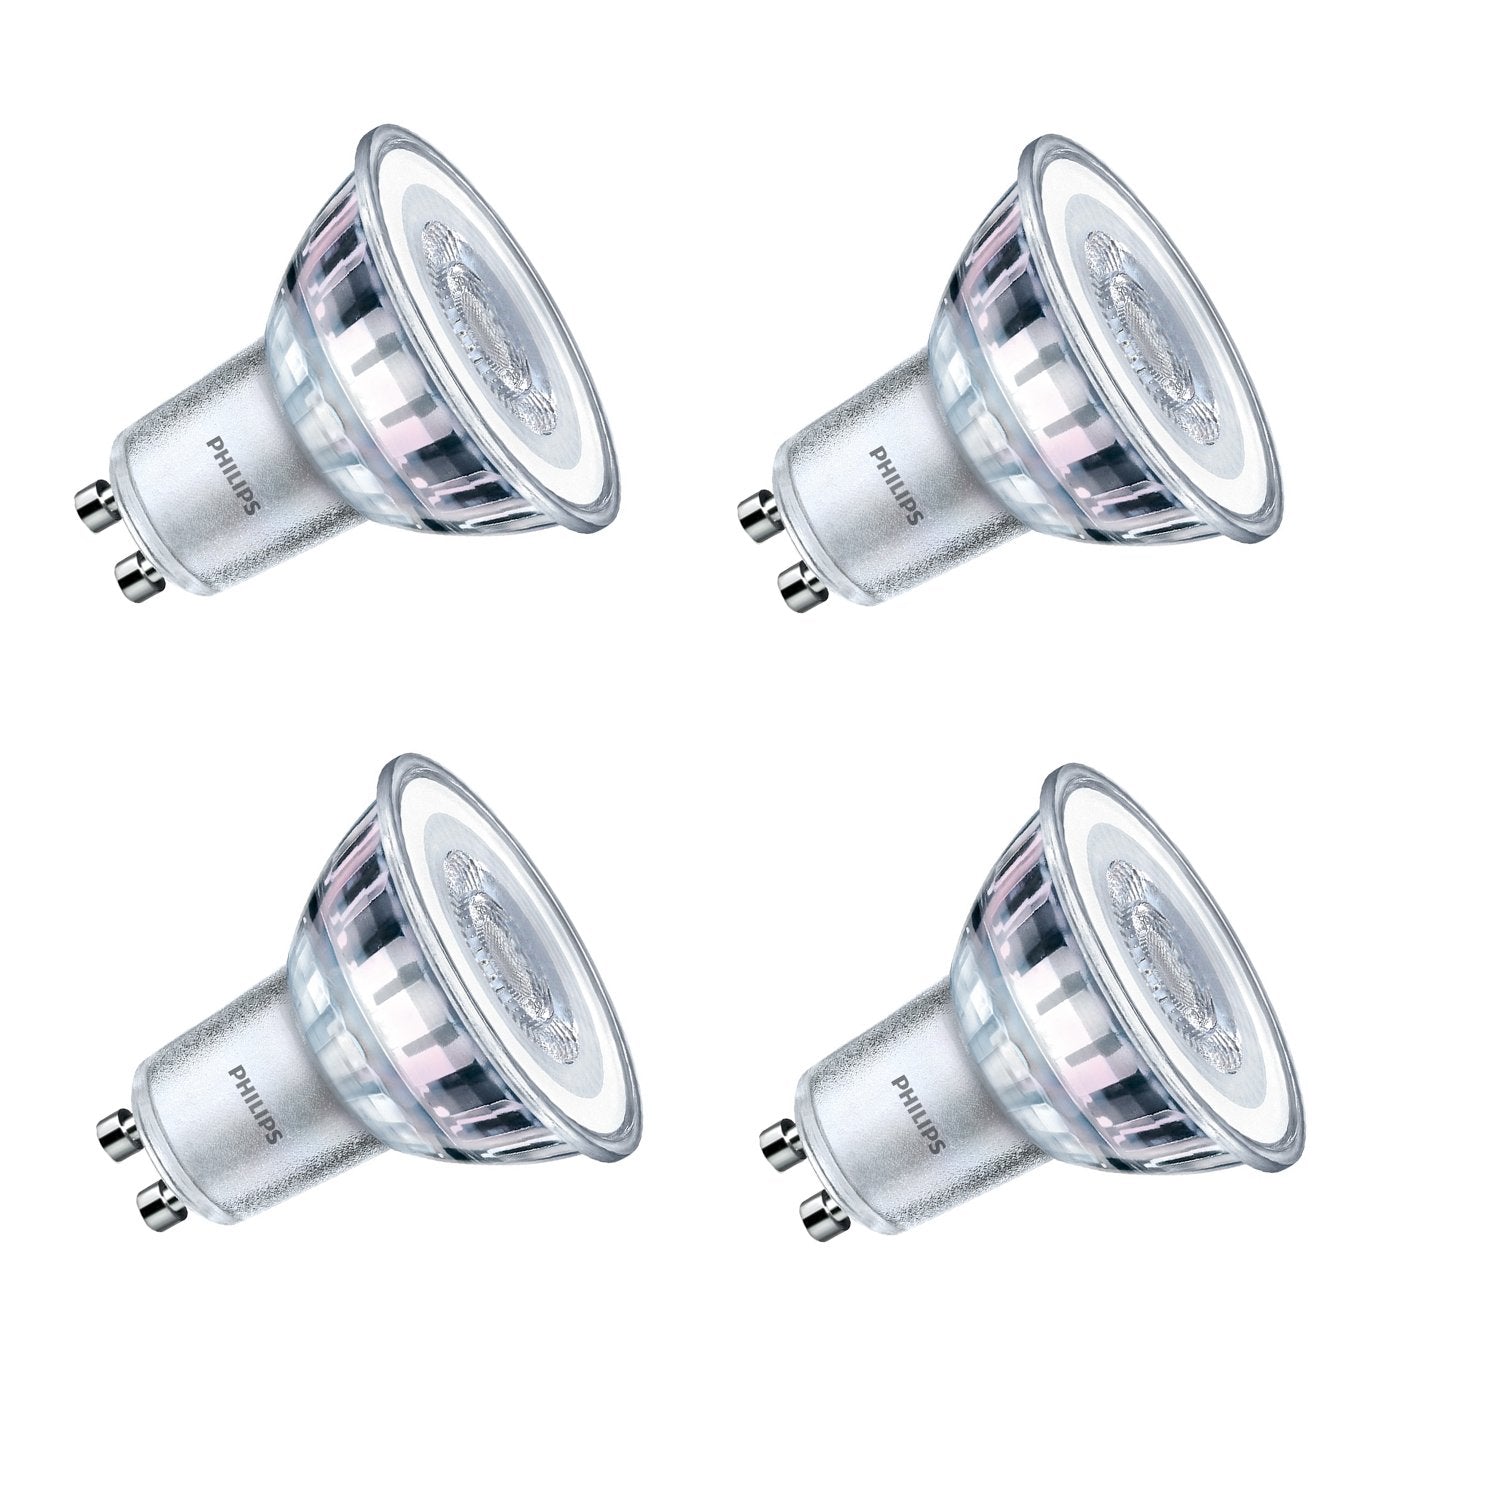 Philips LED Classic GU10 Glass Spot Light, Halogen Replacement, 4.6 W (50 W) - Cool White, Pack of 4